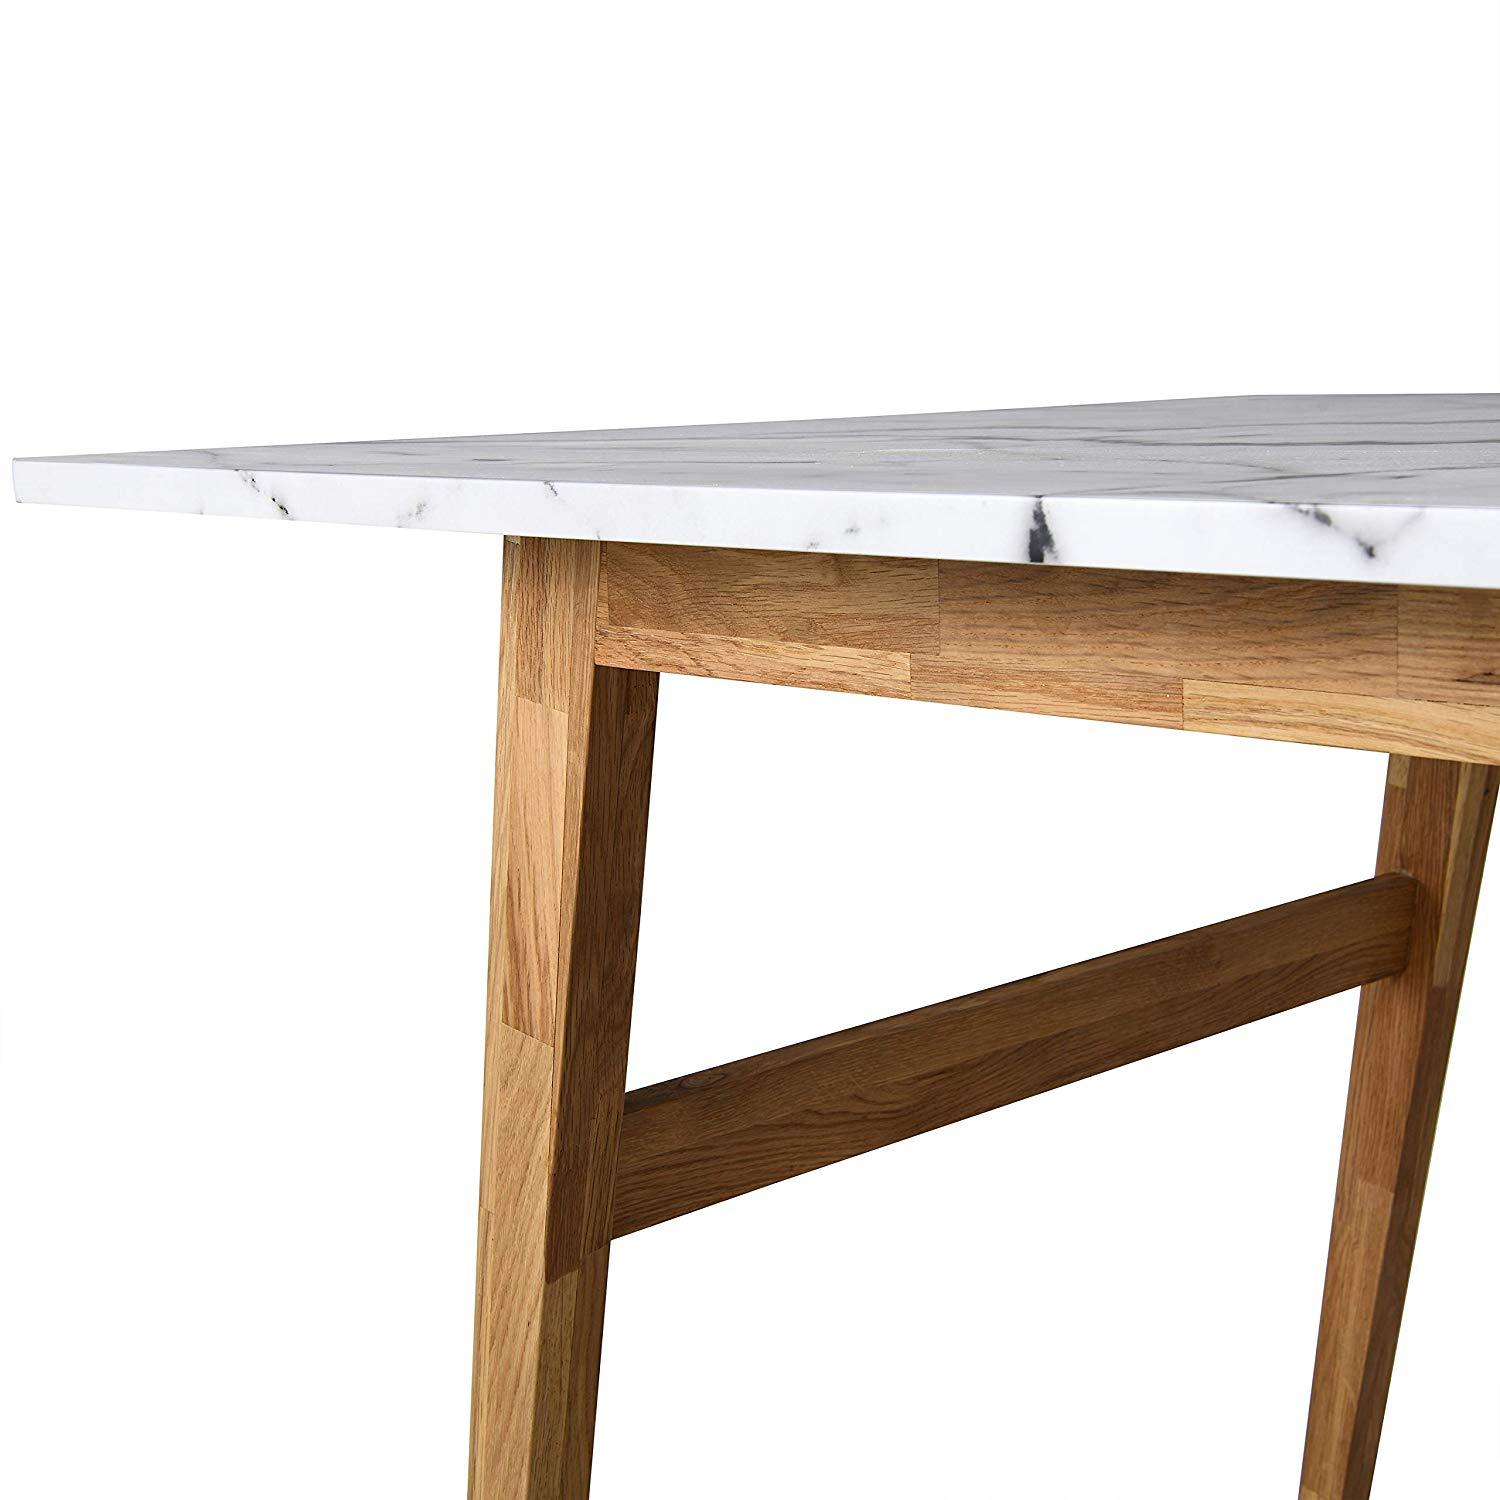 ASCONA White Marble Effect 6-Seater Dining Table with Solid Oak Legs